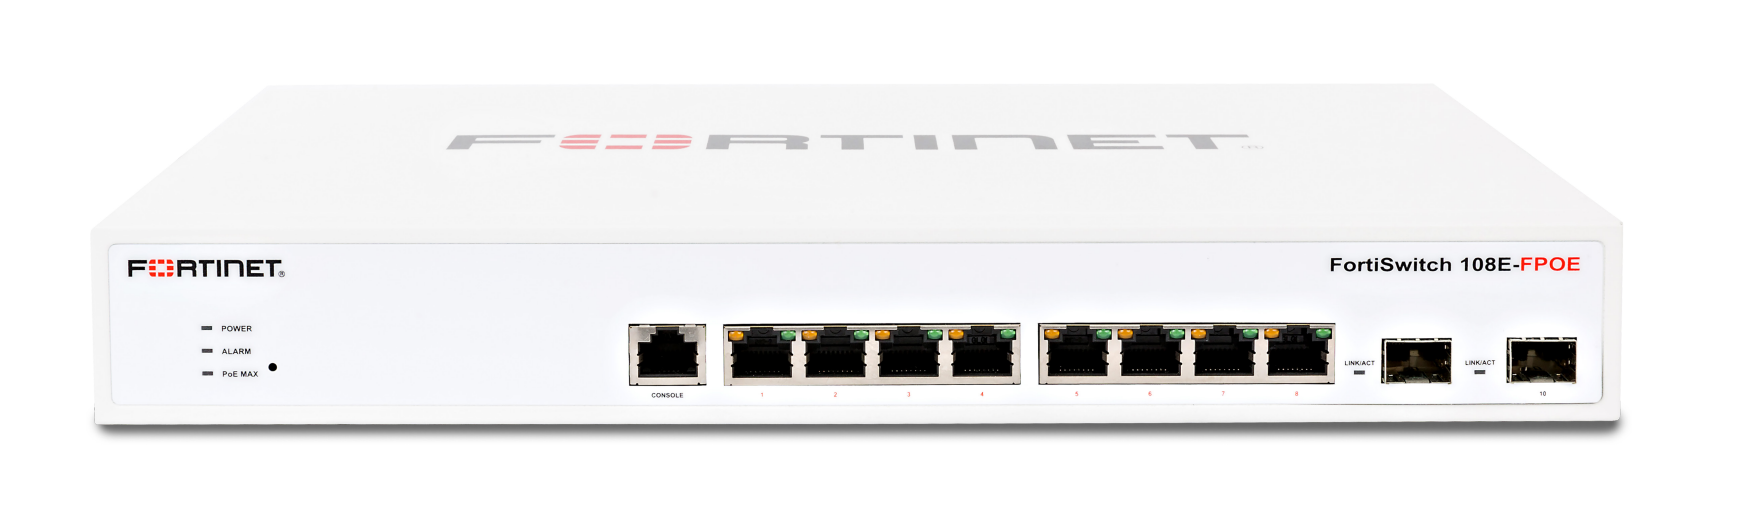 Fortinet FortiSwitch 108E-FPOE (FS-108E-FPOE)